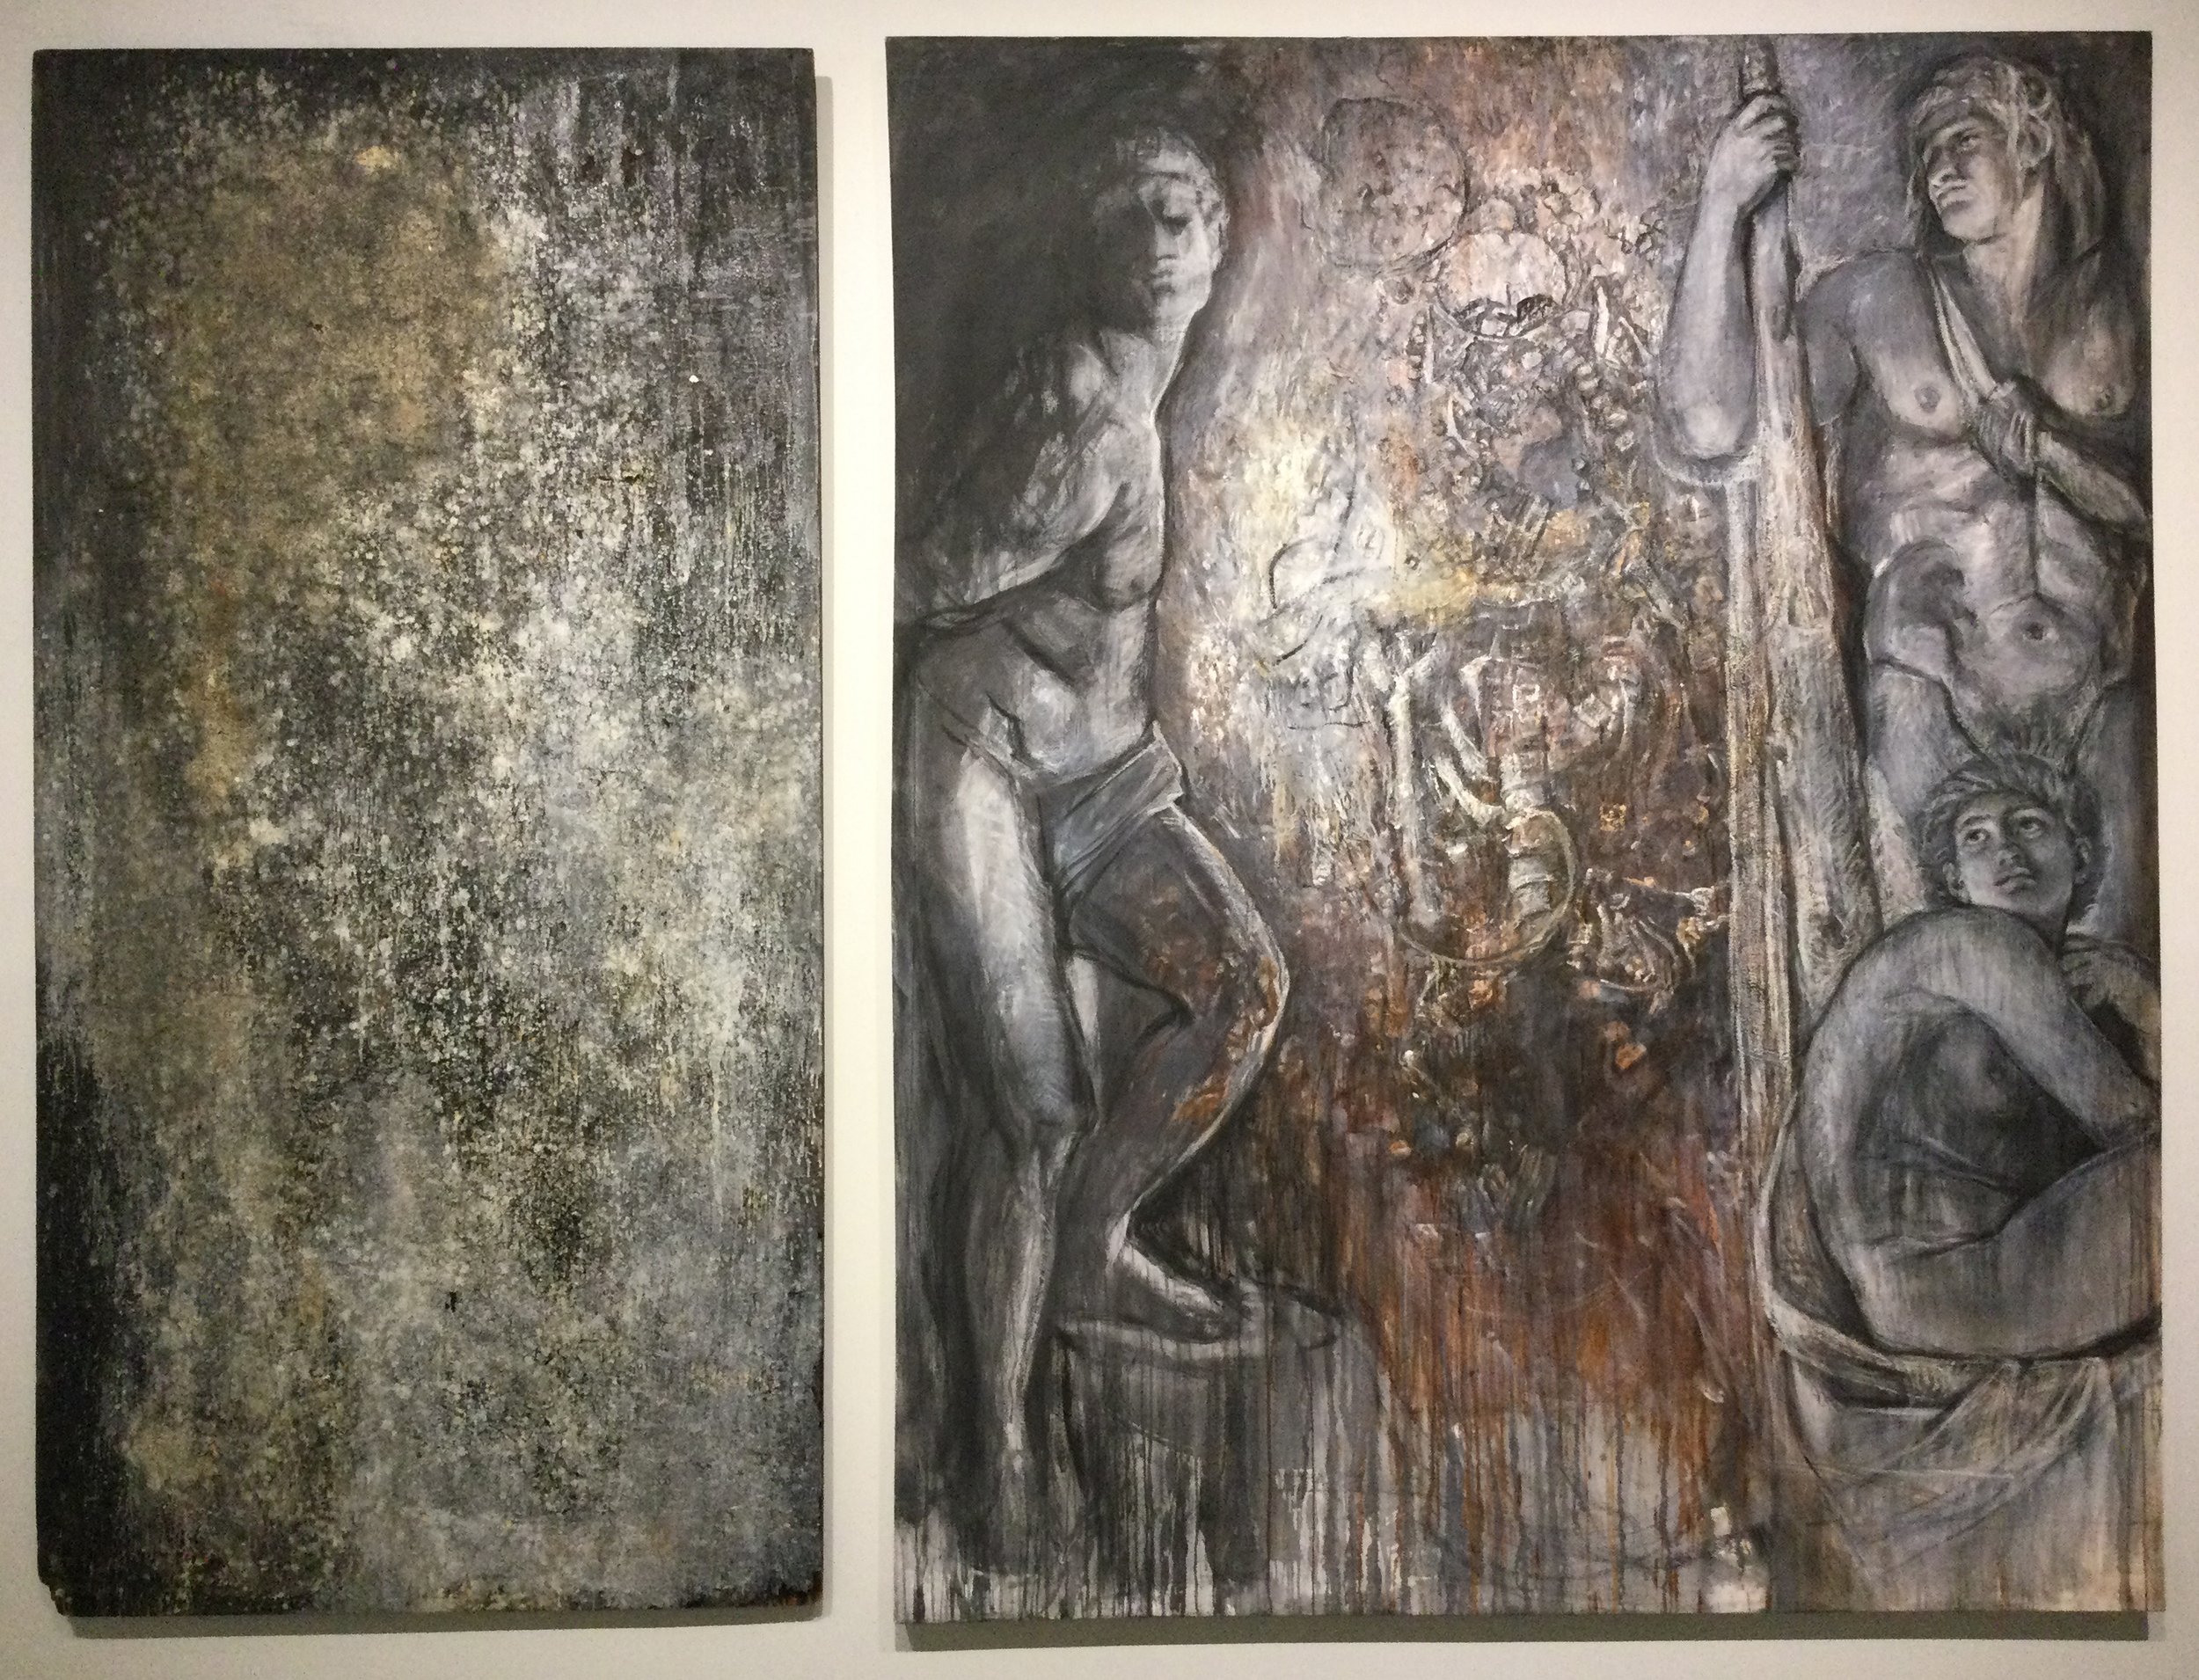 2Al(0) - Witnesses, 96x48 & 96x76 in. diptych, oil, torched wood, resins, canvas 1995.jpg